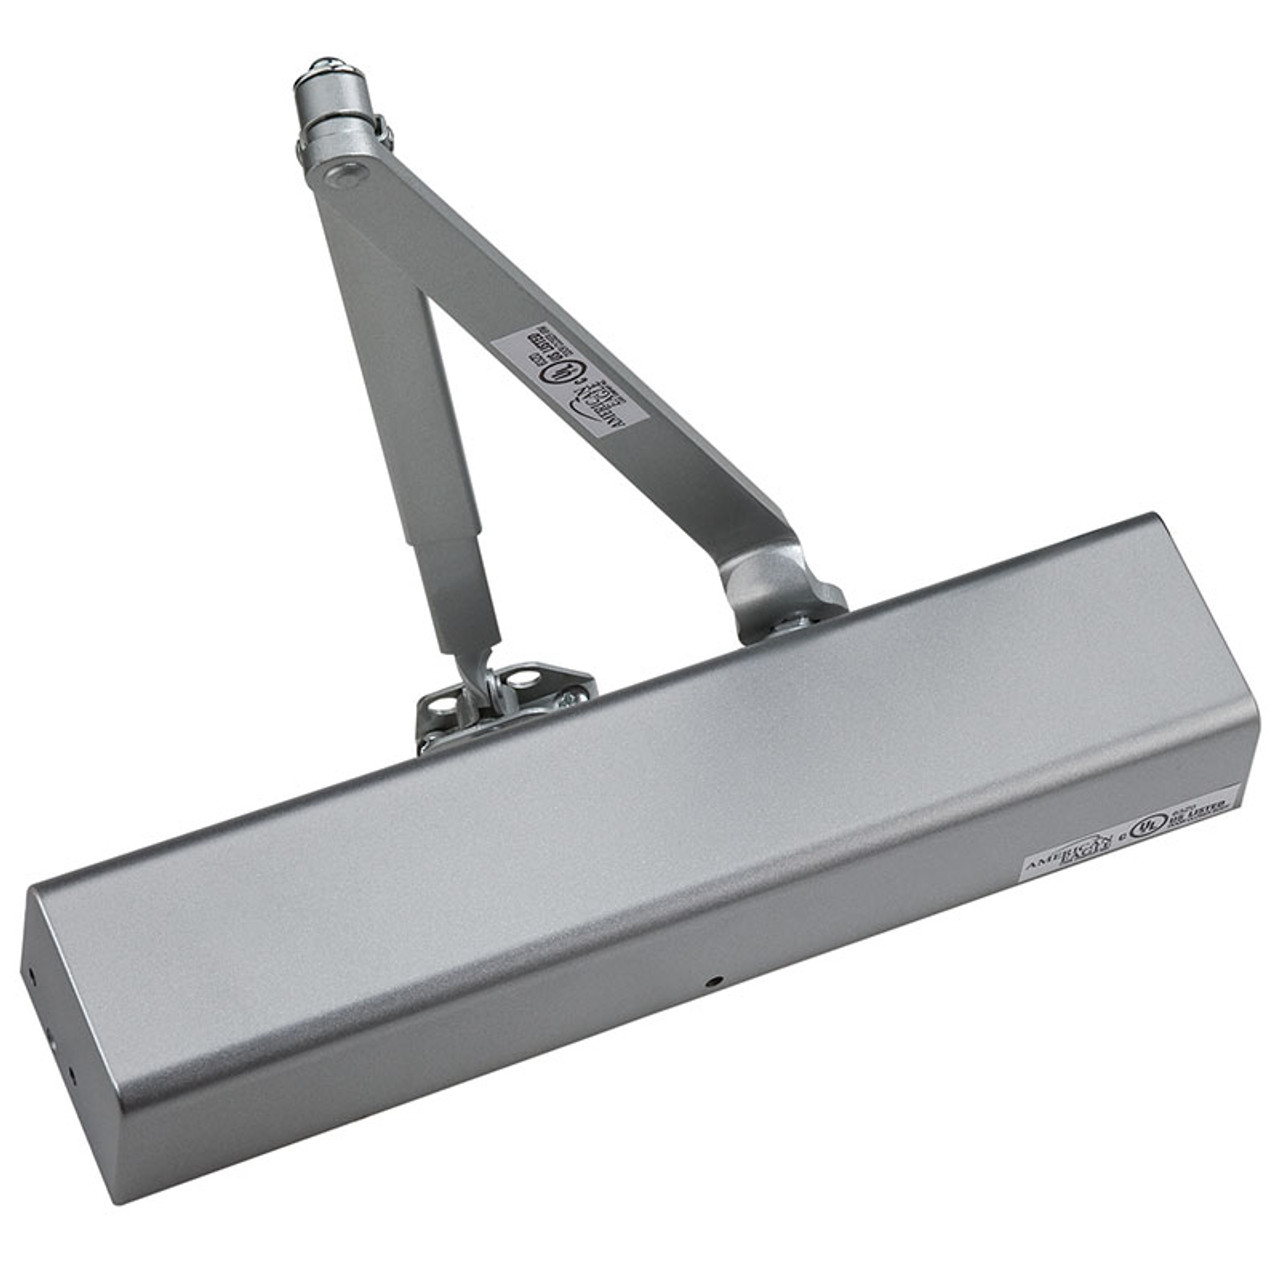 PDQ Commercial Door Closer 5100 Full Featured and Fire Rated